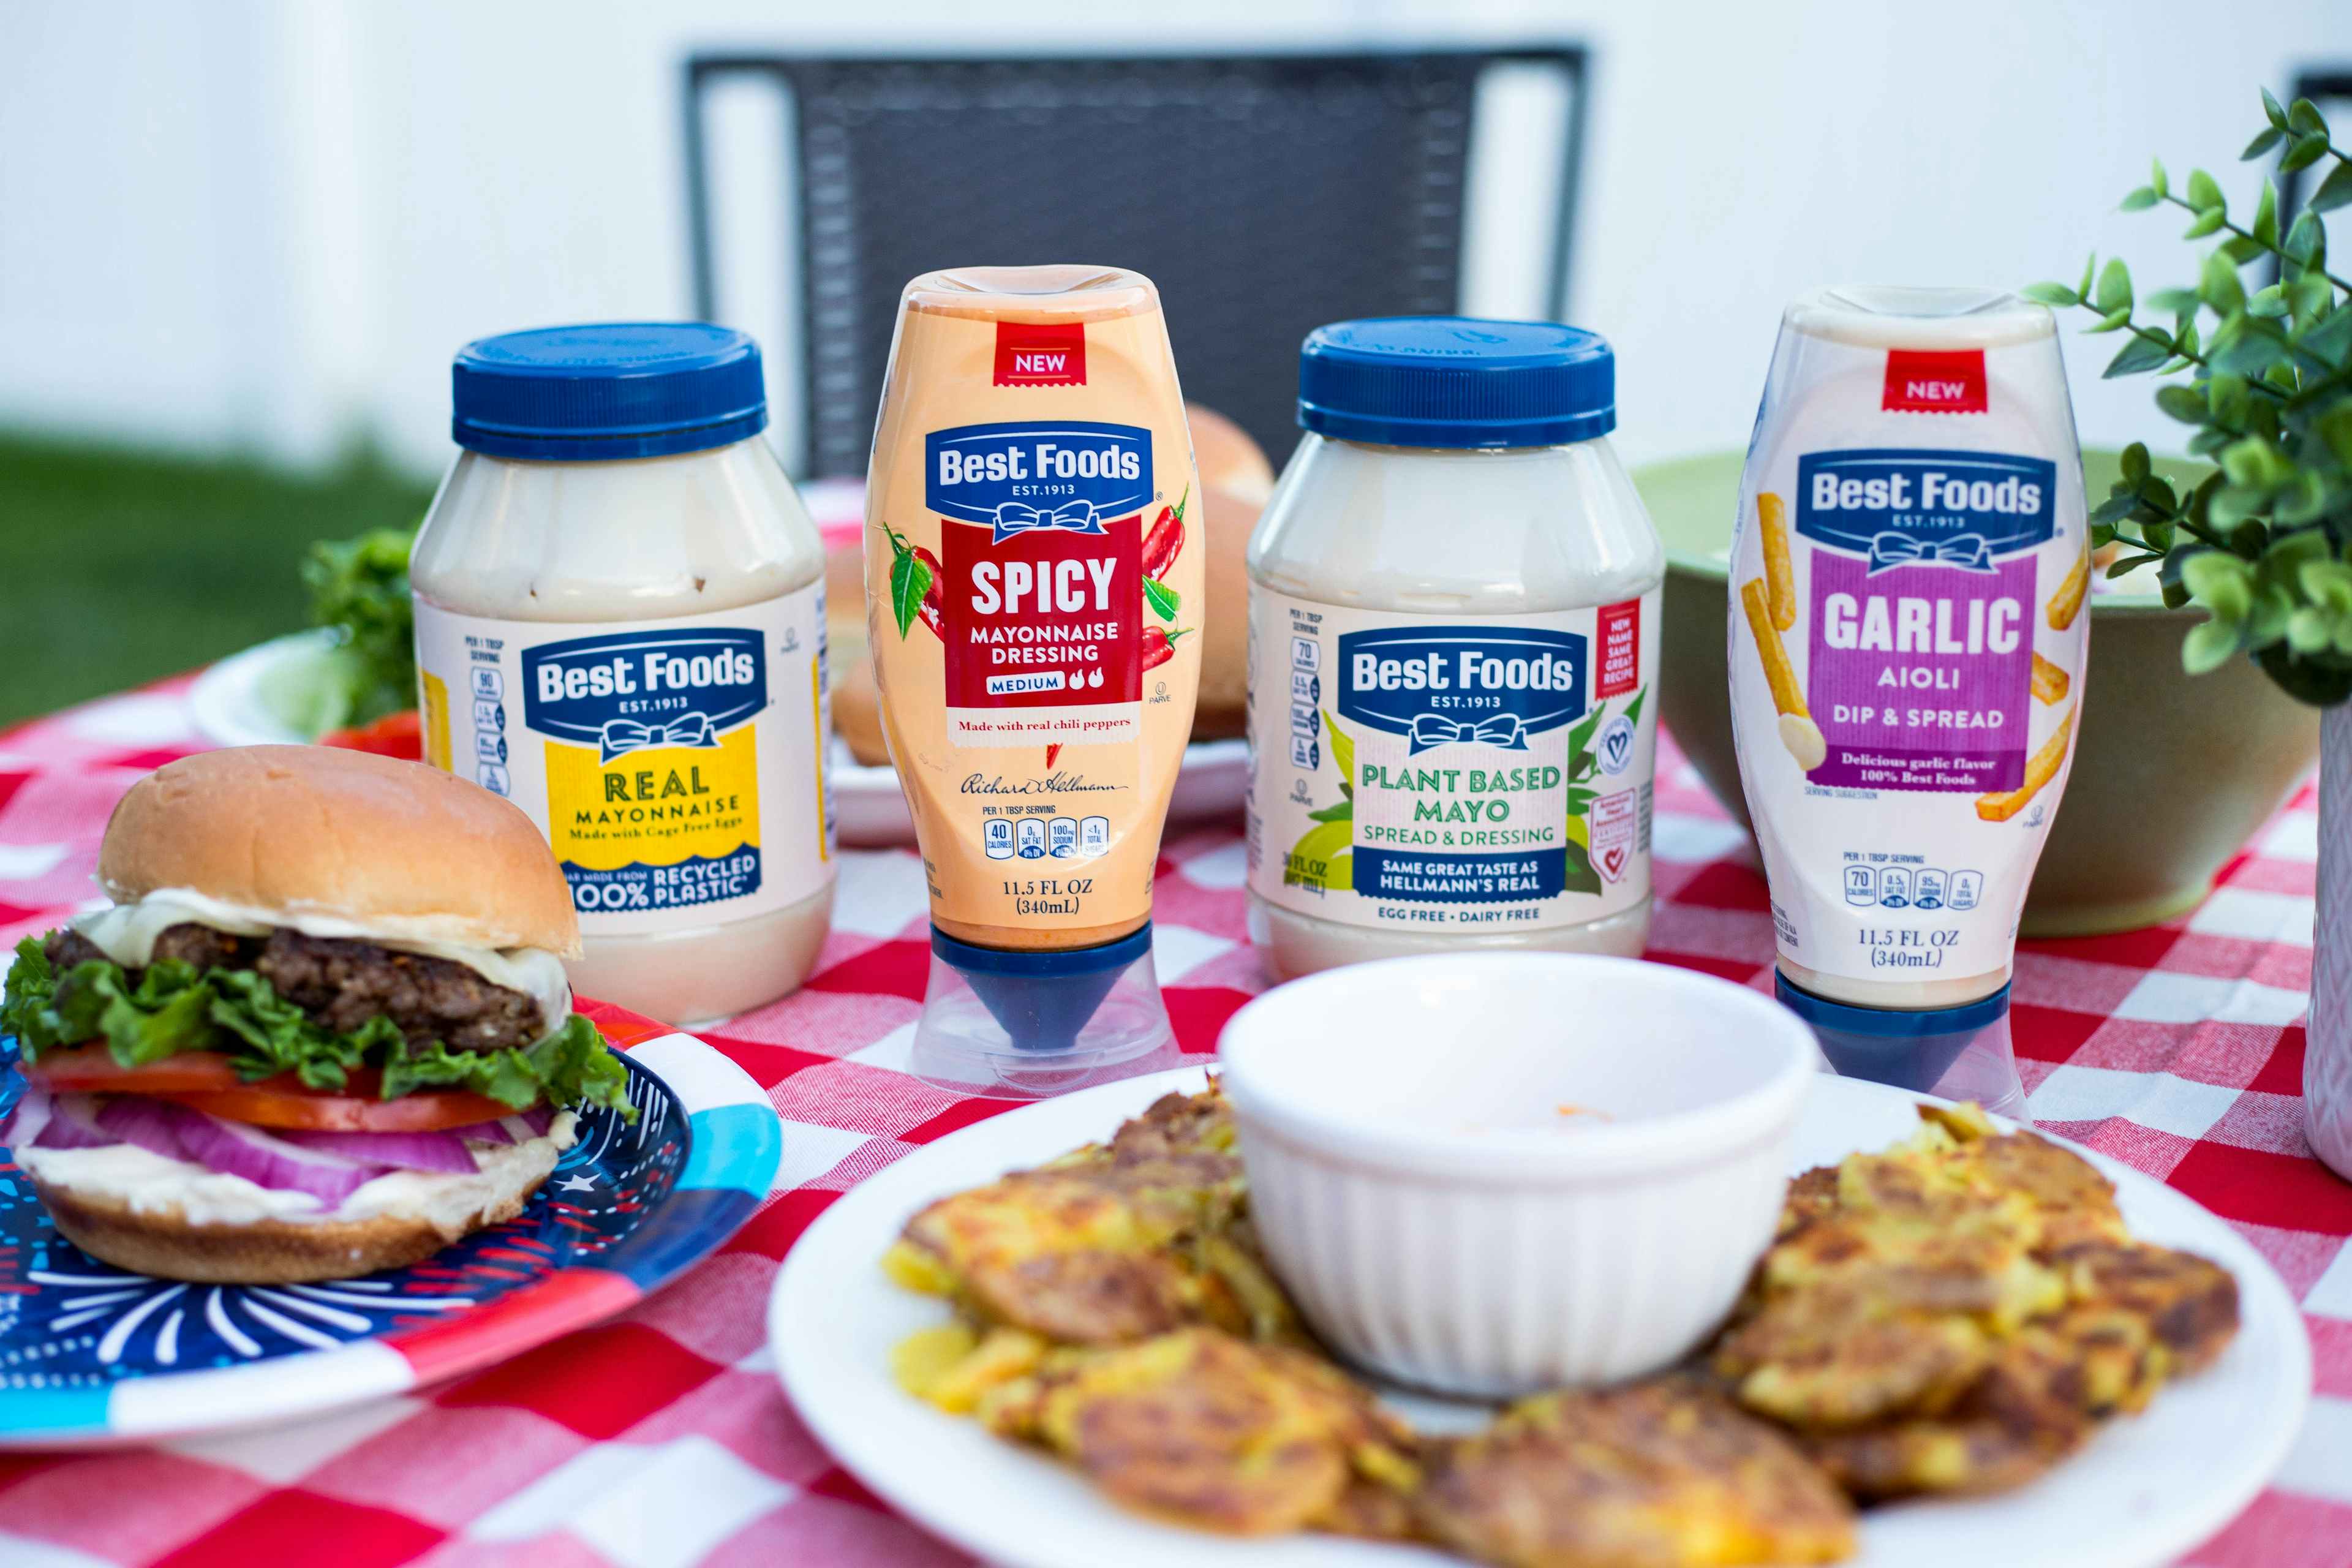 best-food-hellmanns-july-4-bbq-mayonnaise-mayo-kcl-3